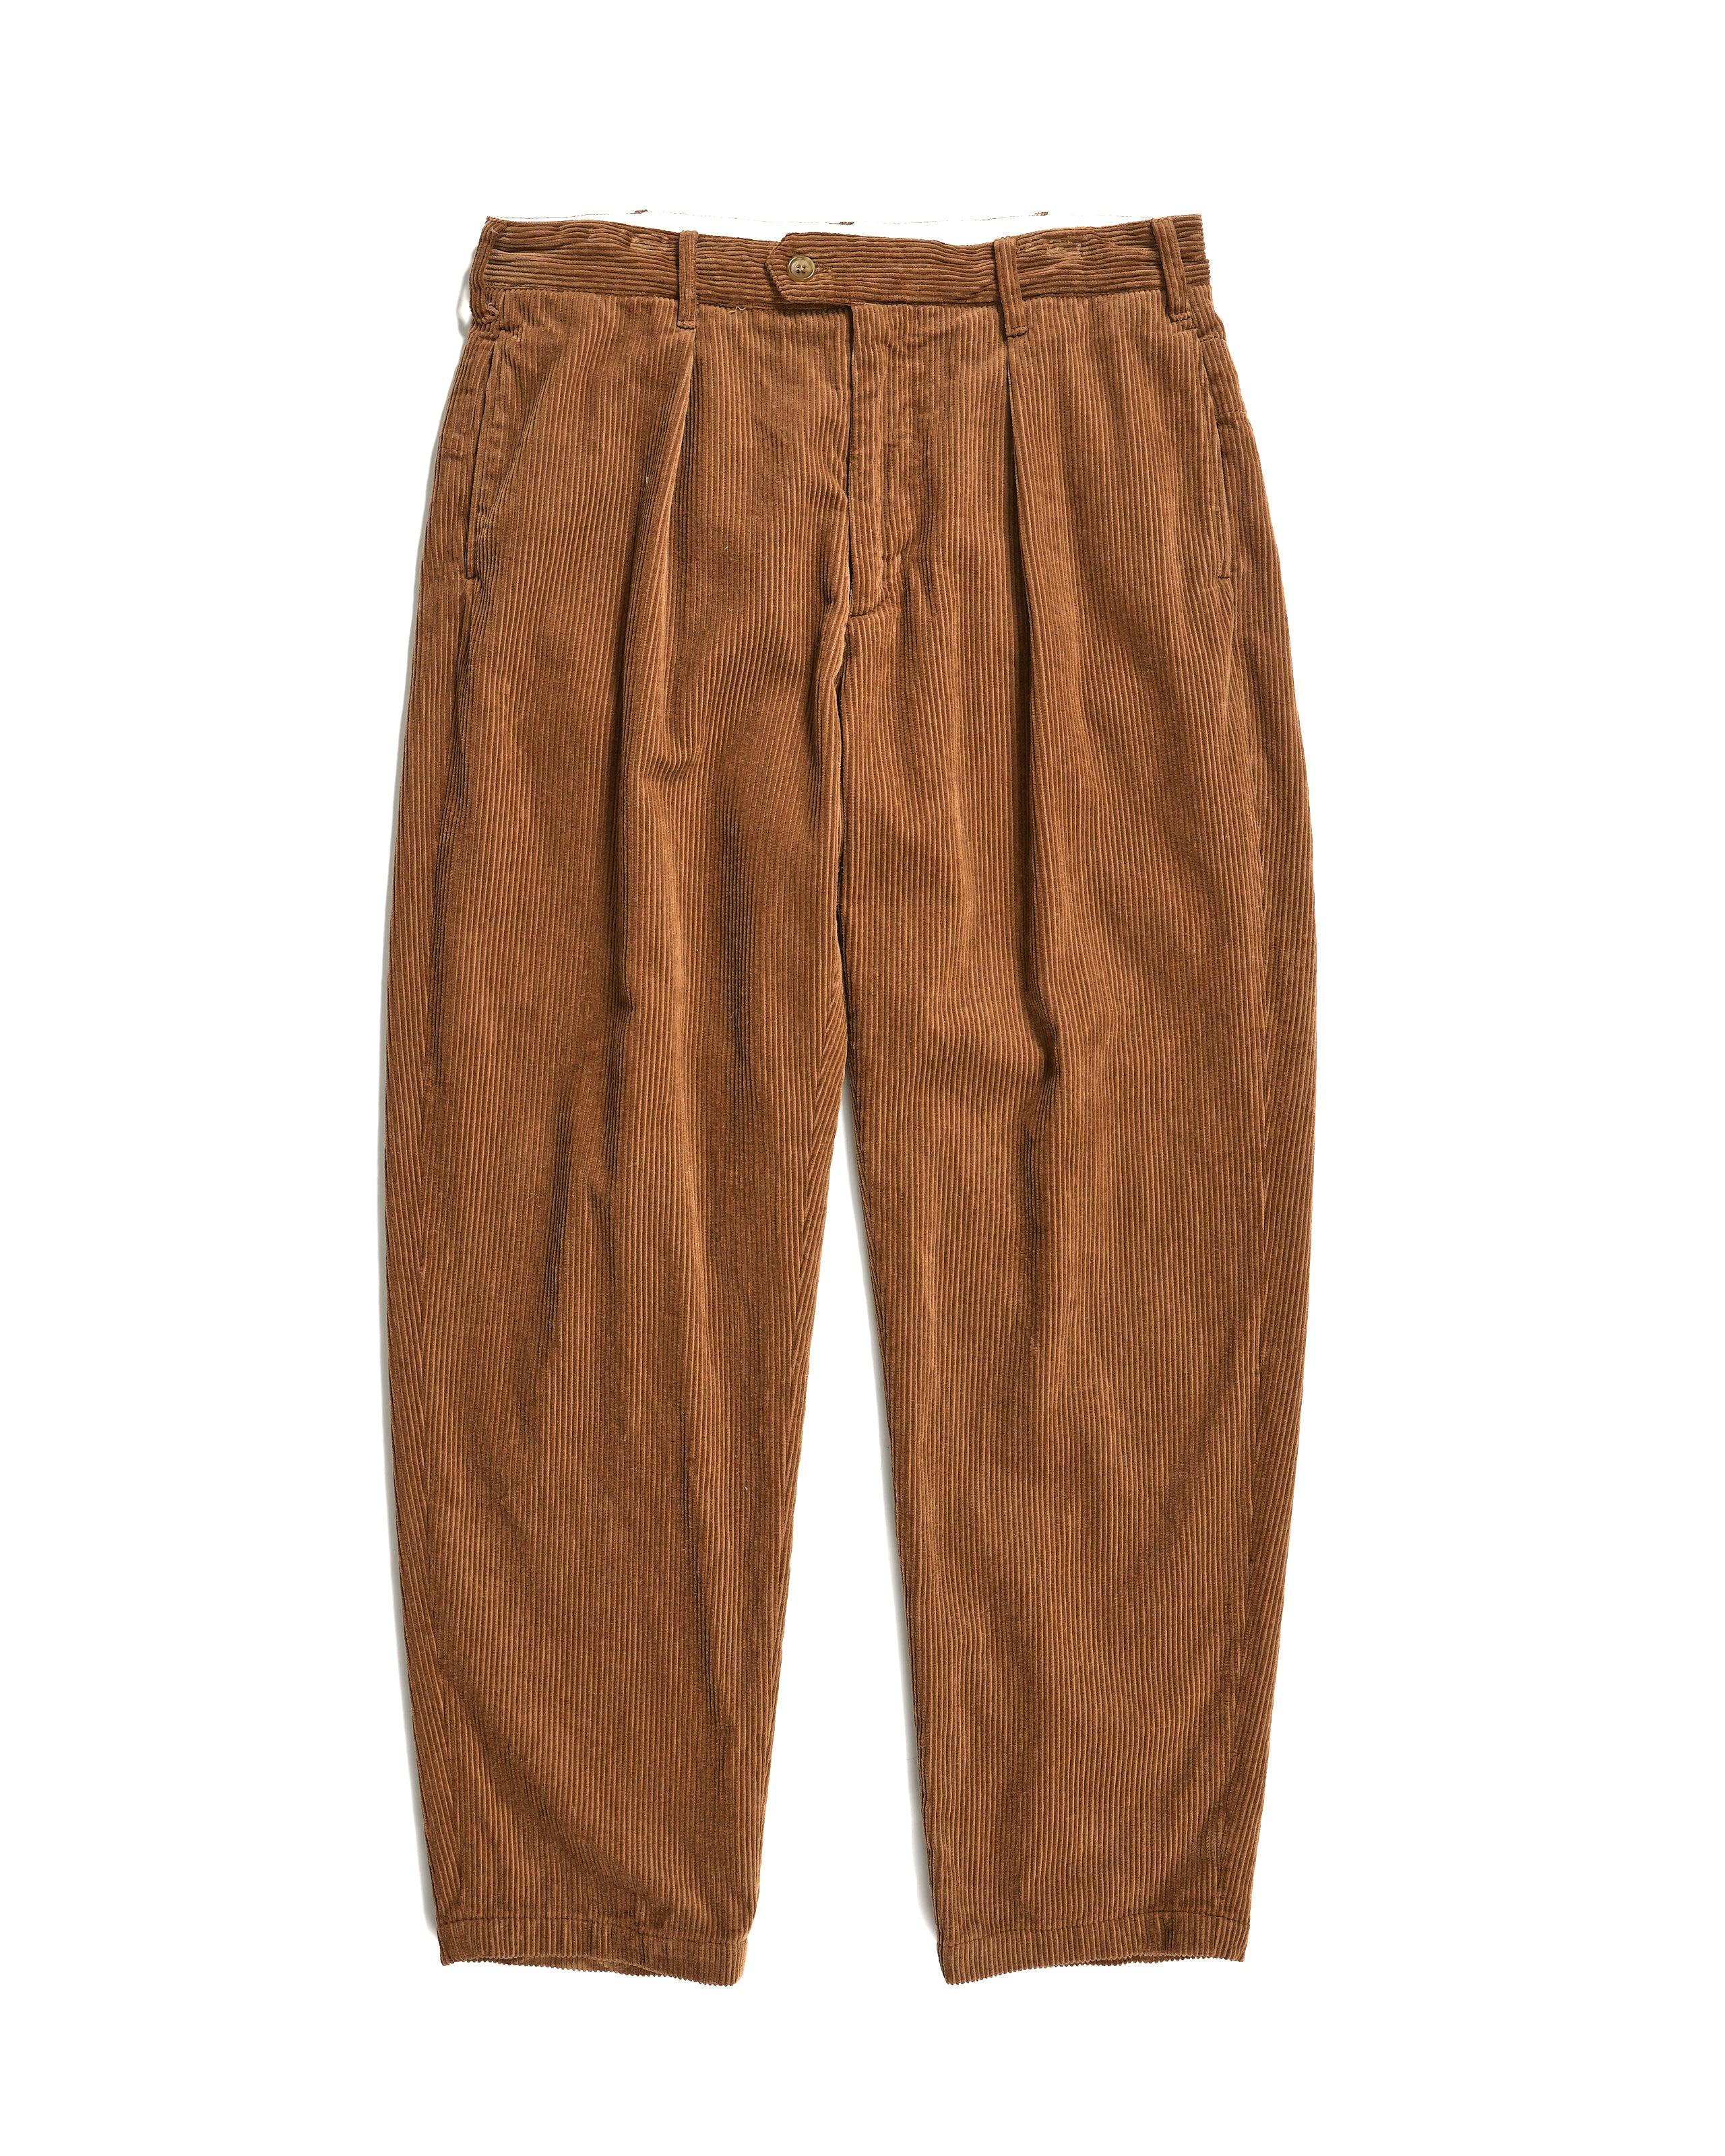 Chestnut Needle Cord Jeans